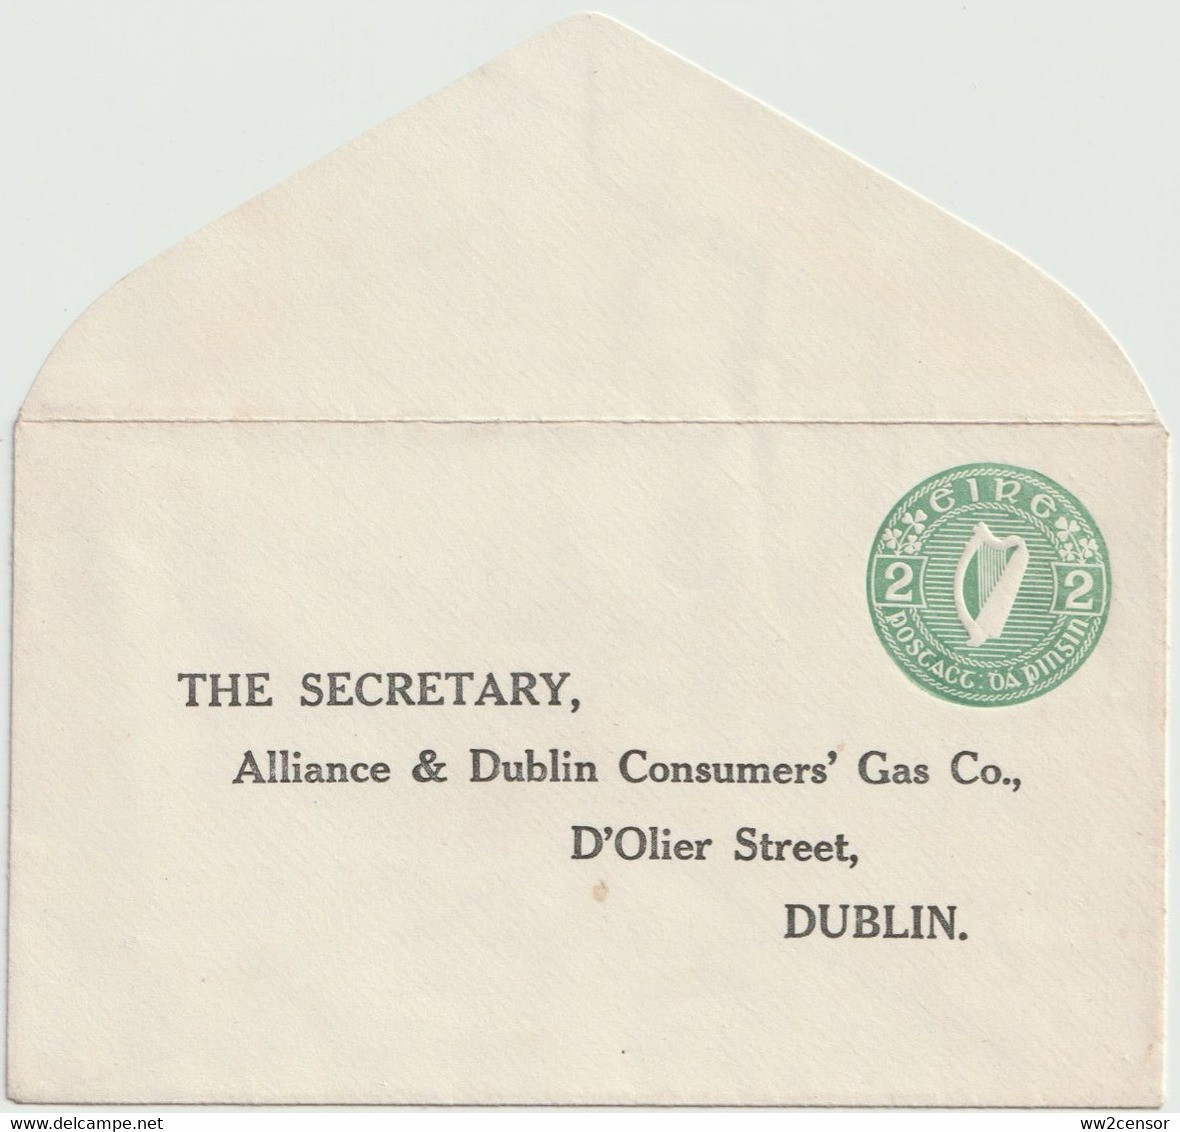 Ireland Irland Alliance & Dublin Consumers' Gas Co. Stamped To Order Postal Stationery 2d Envelope High Catalogue Value - Postal Stationery